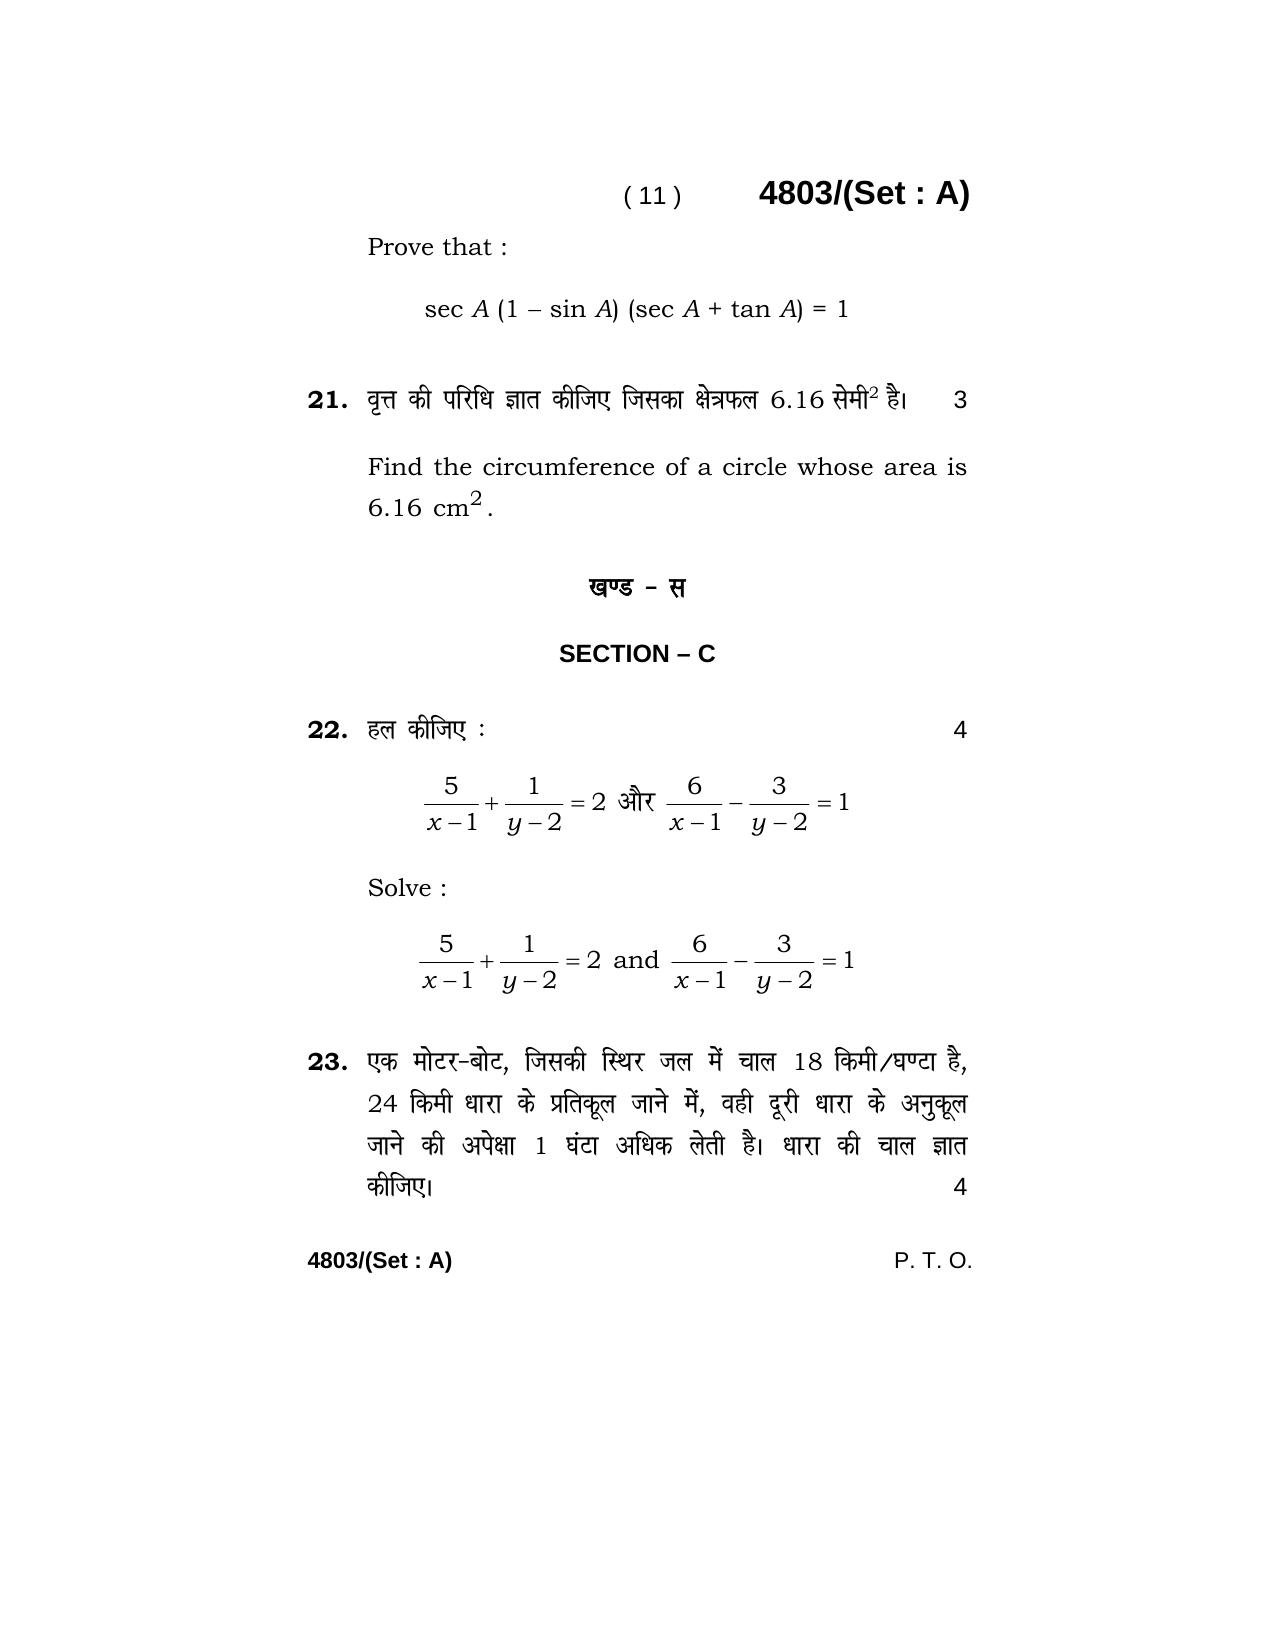 Haryana Board HBSE Class 10 Mathematics 2020 Question Paper - Page 11